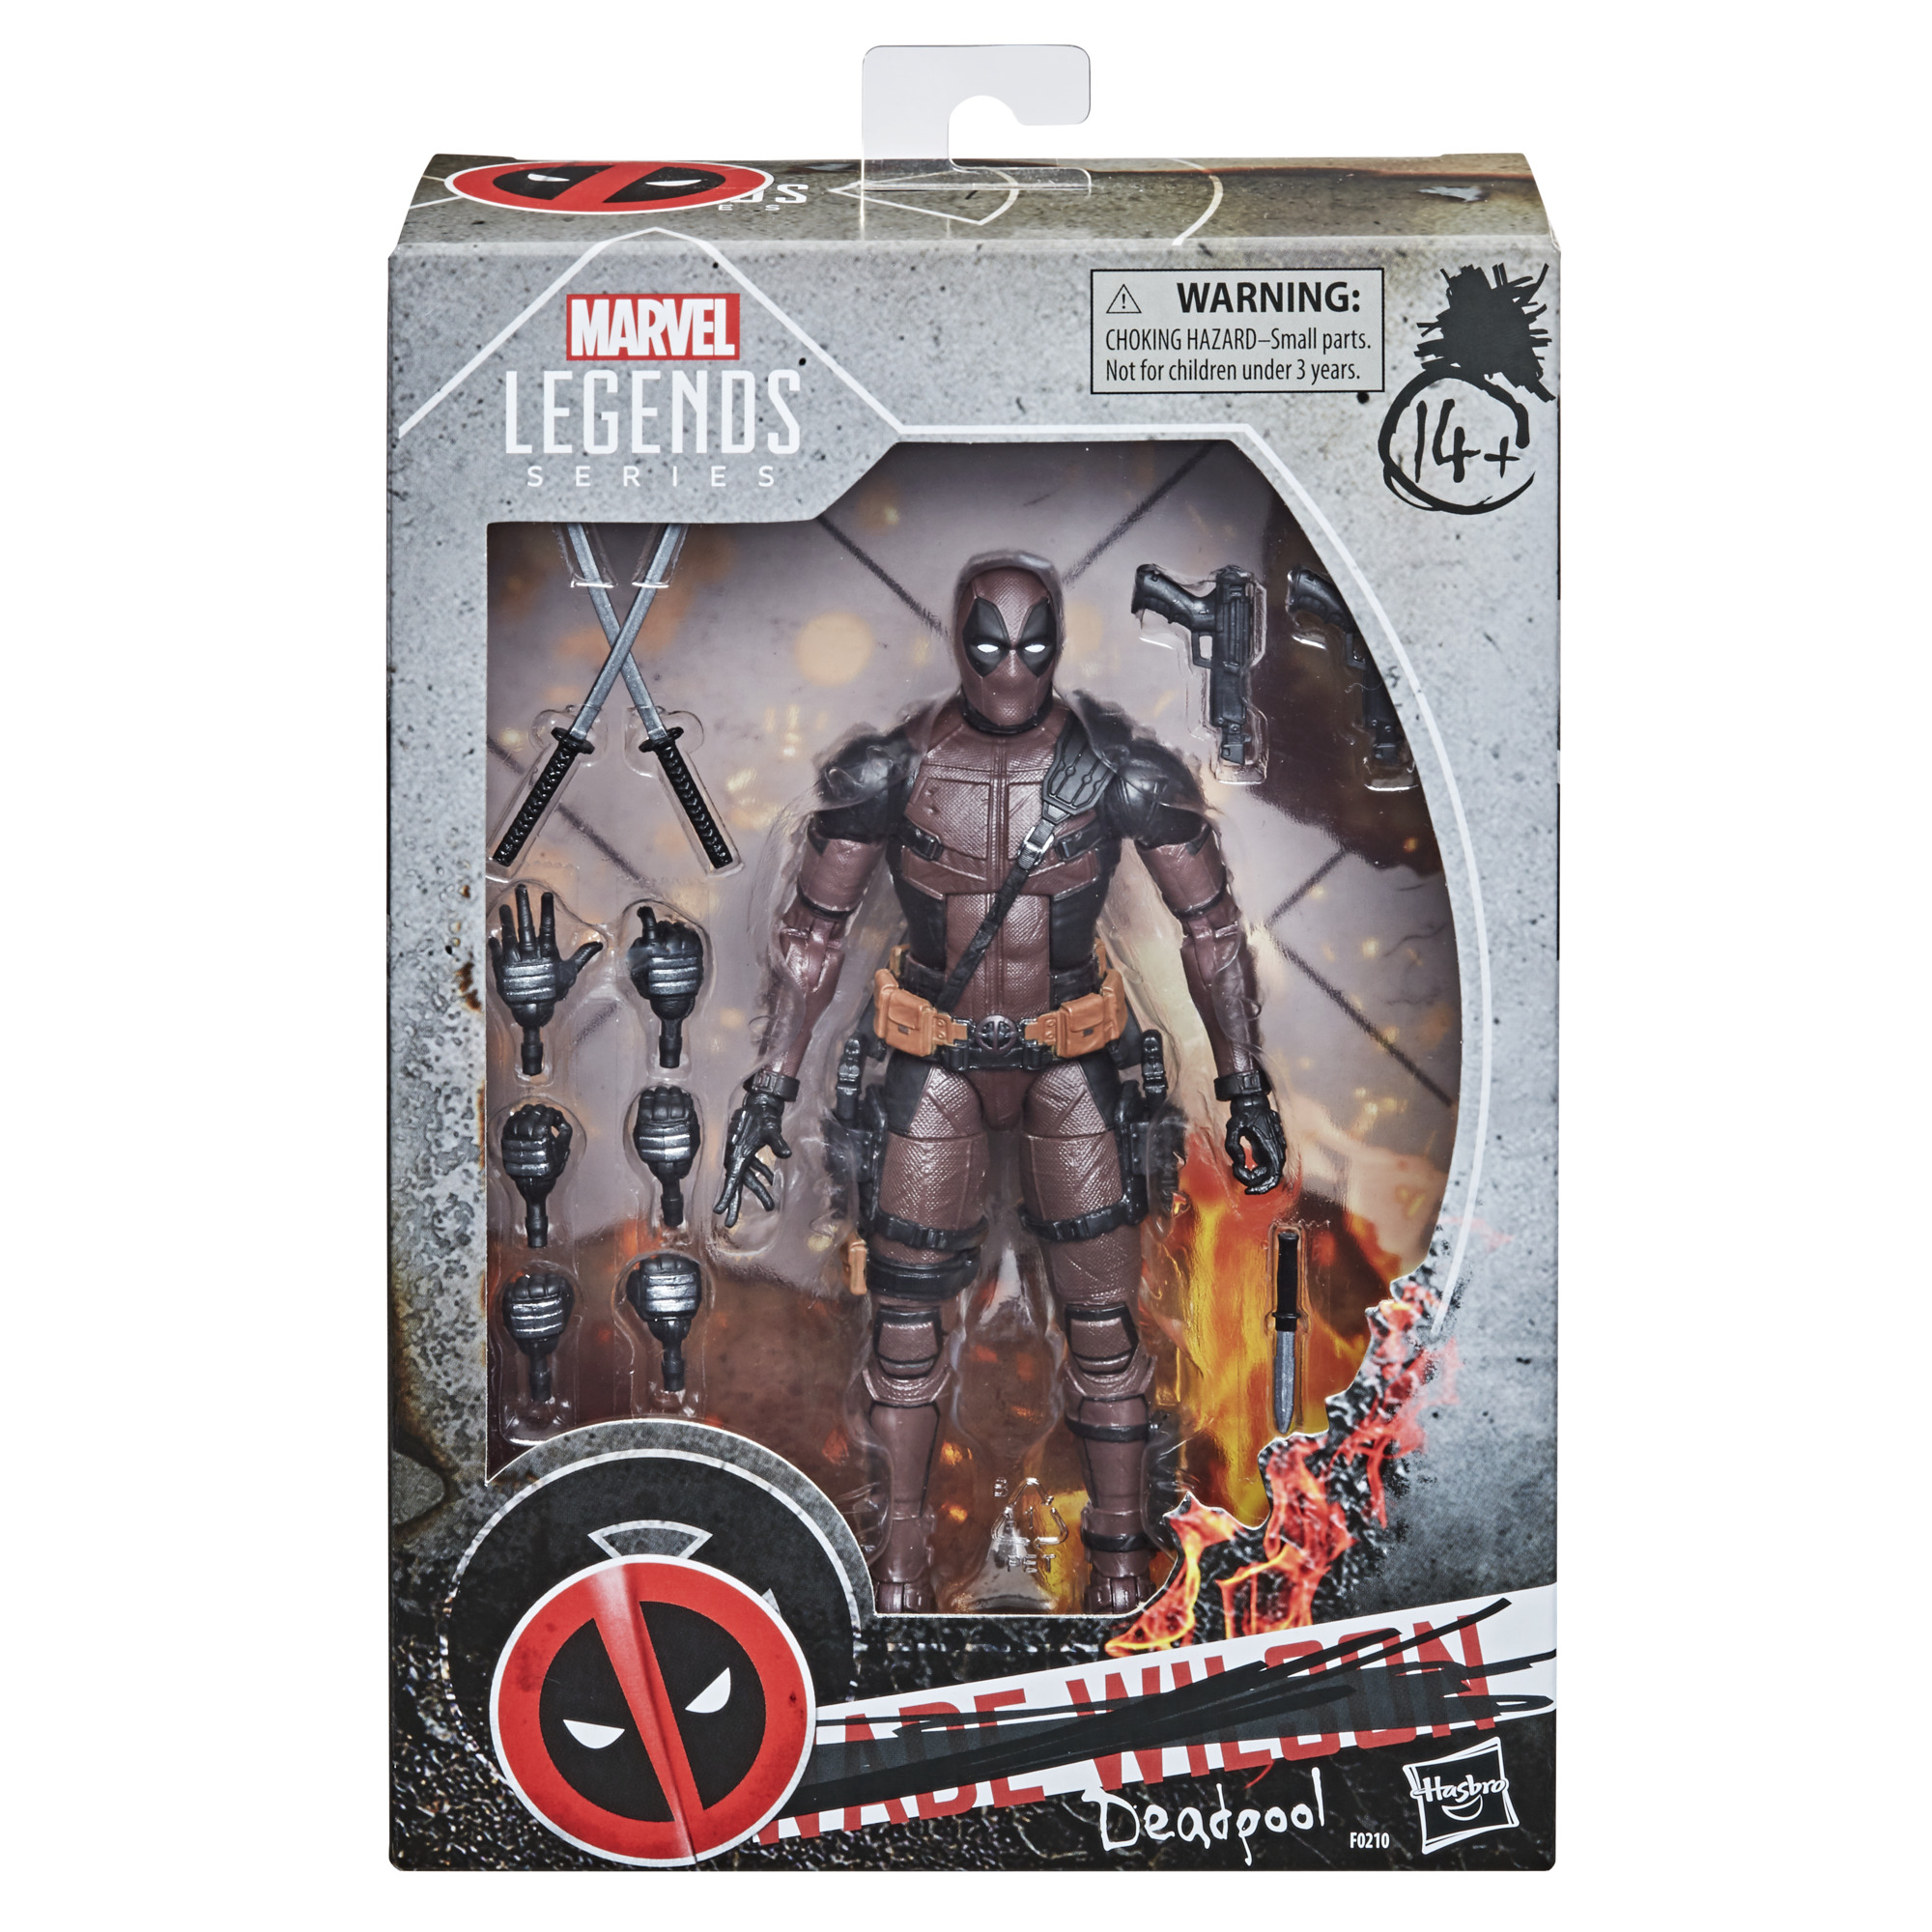 Hasbro: Marvel Legends Dusty Deadpool, Silver Surfer, and House of 